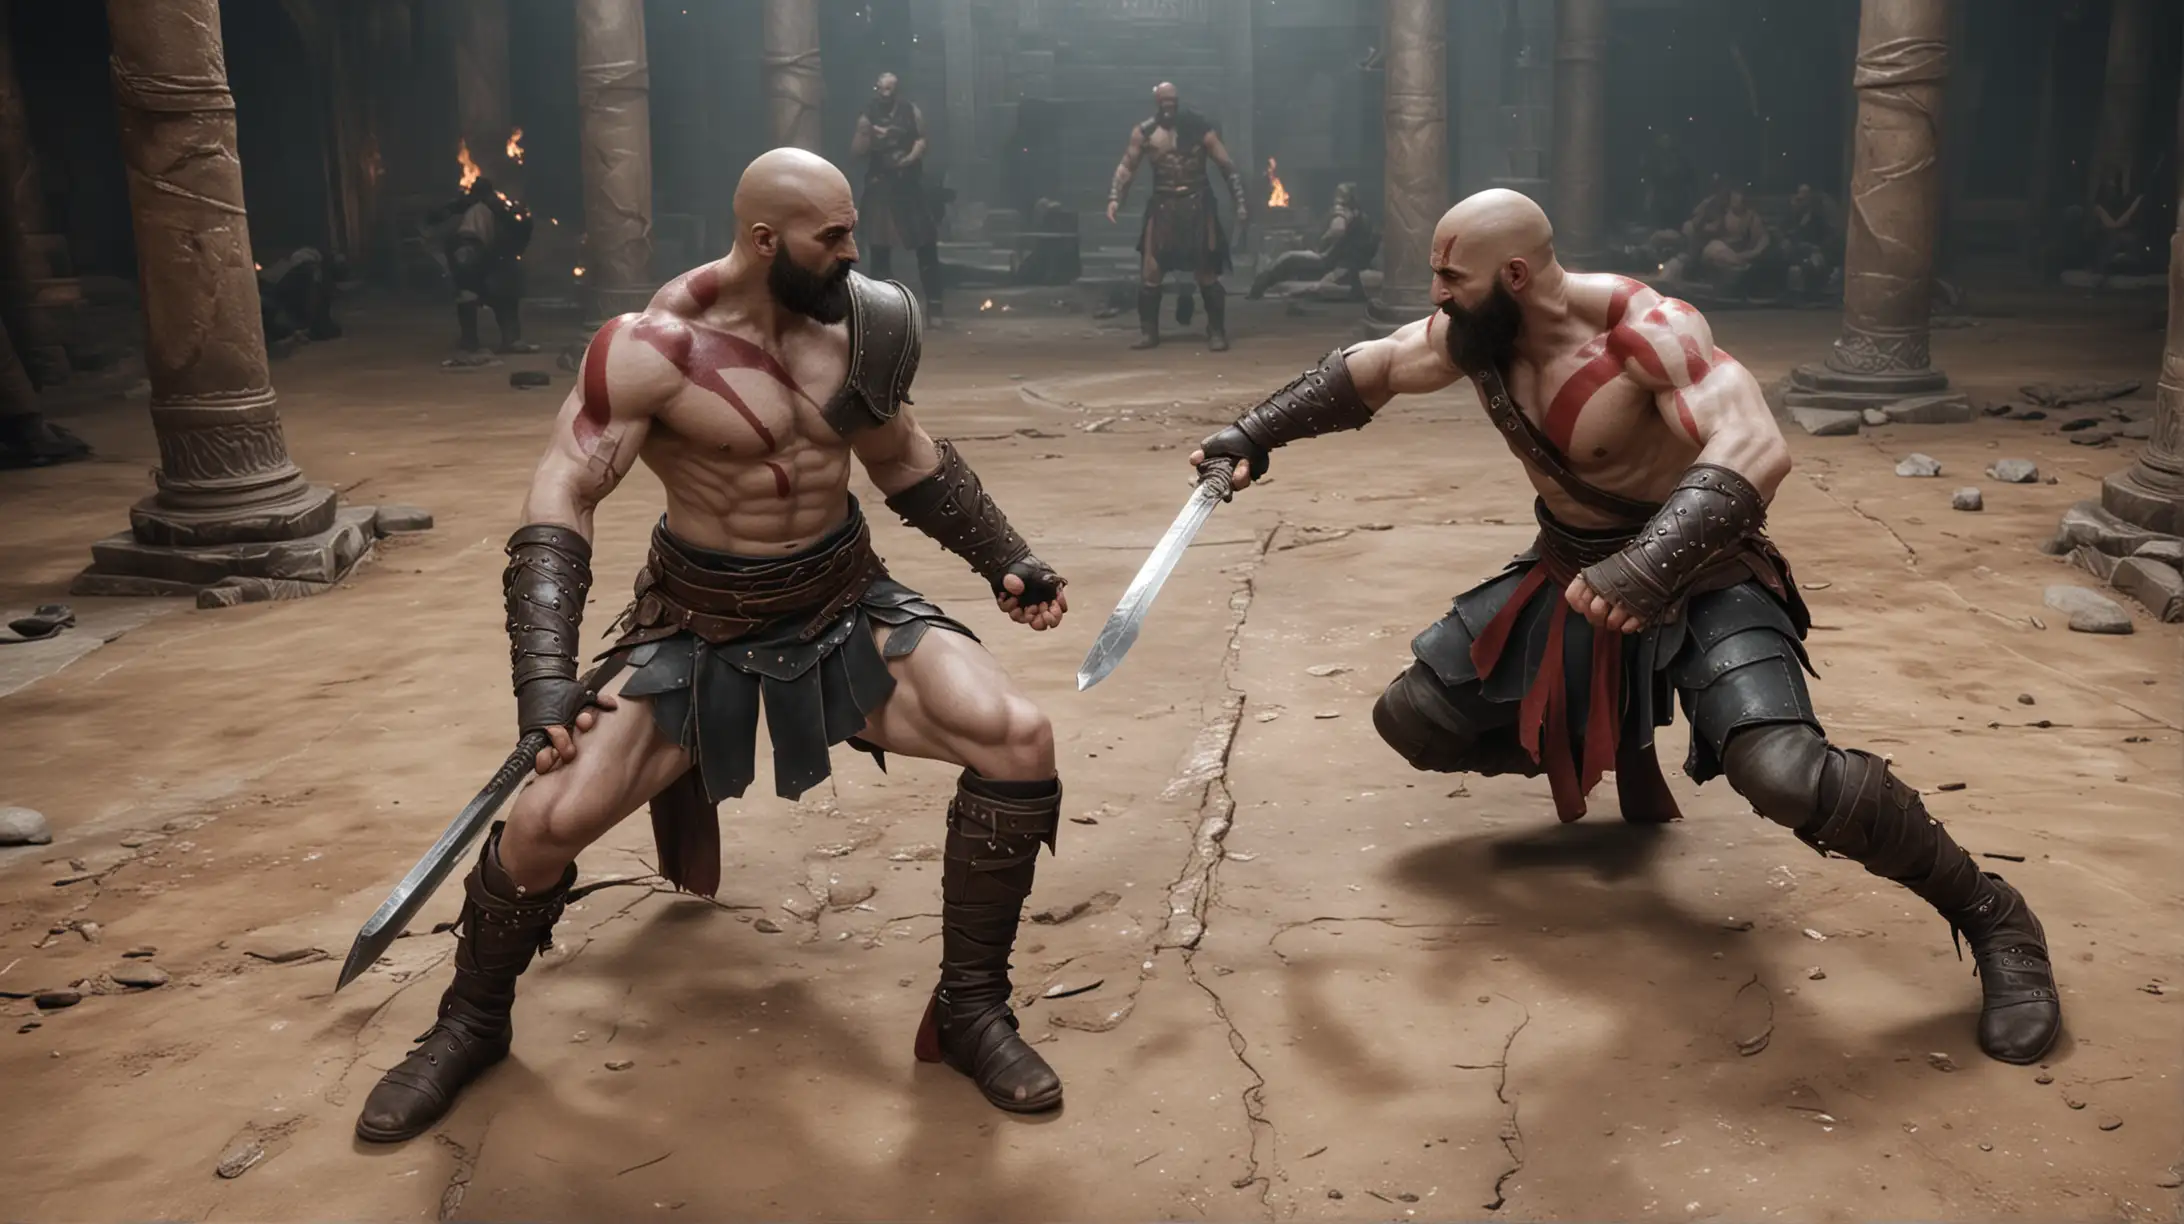 Kratos fights Gladiators , show a Mistress in black skirt with slave handsome guy on the floor.